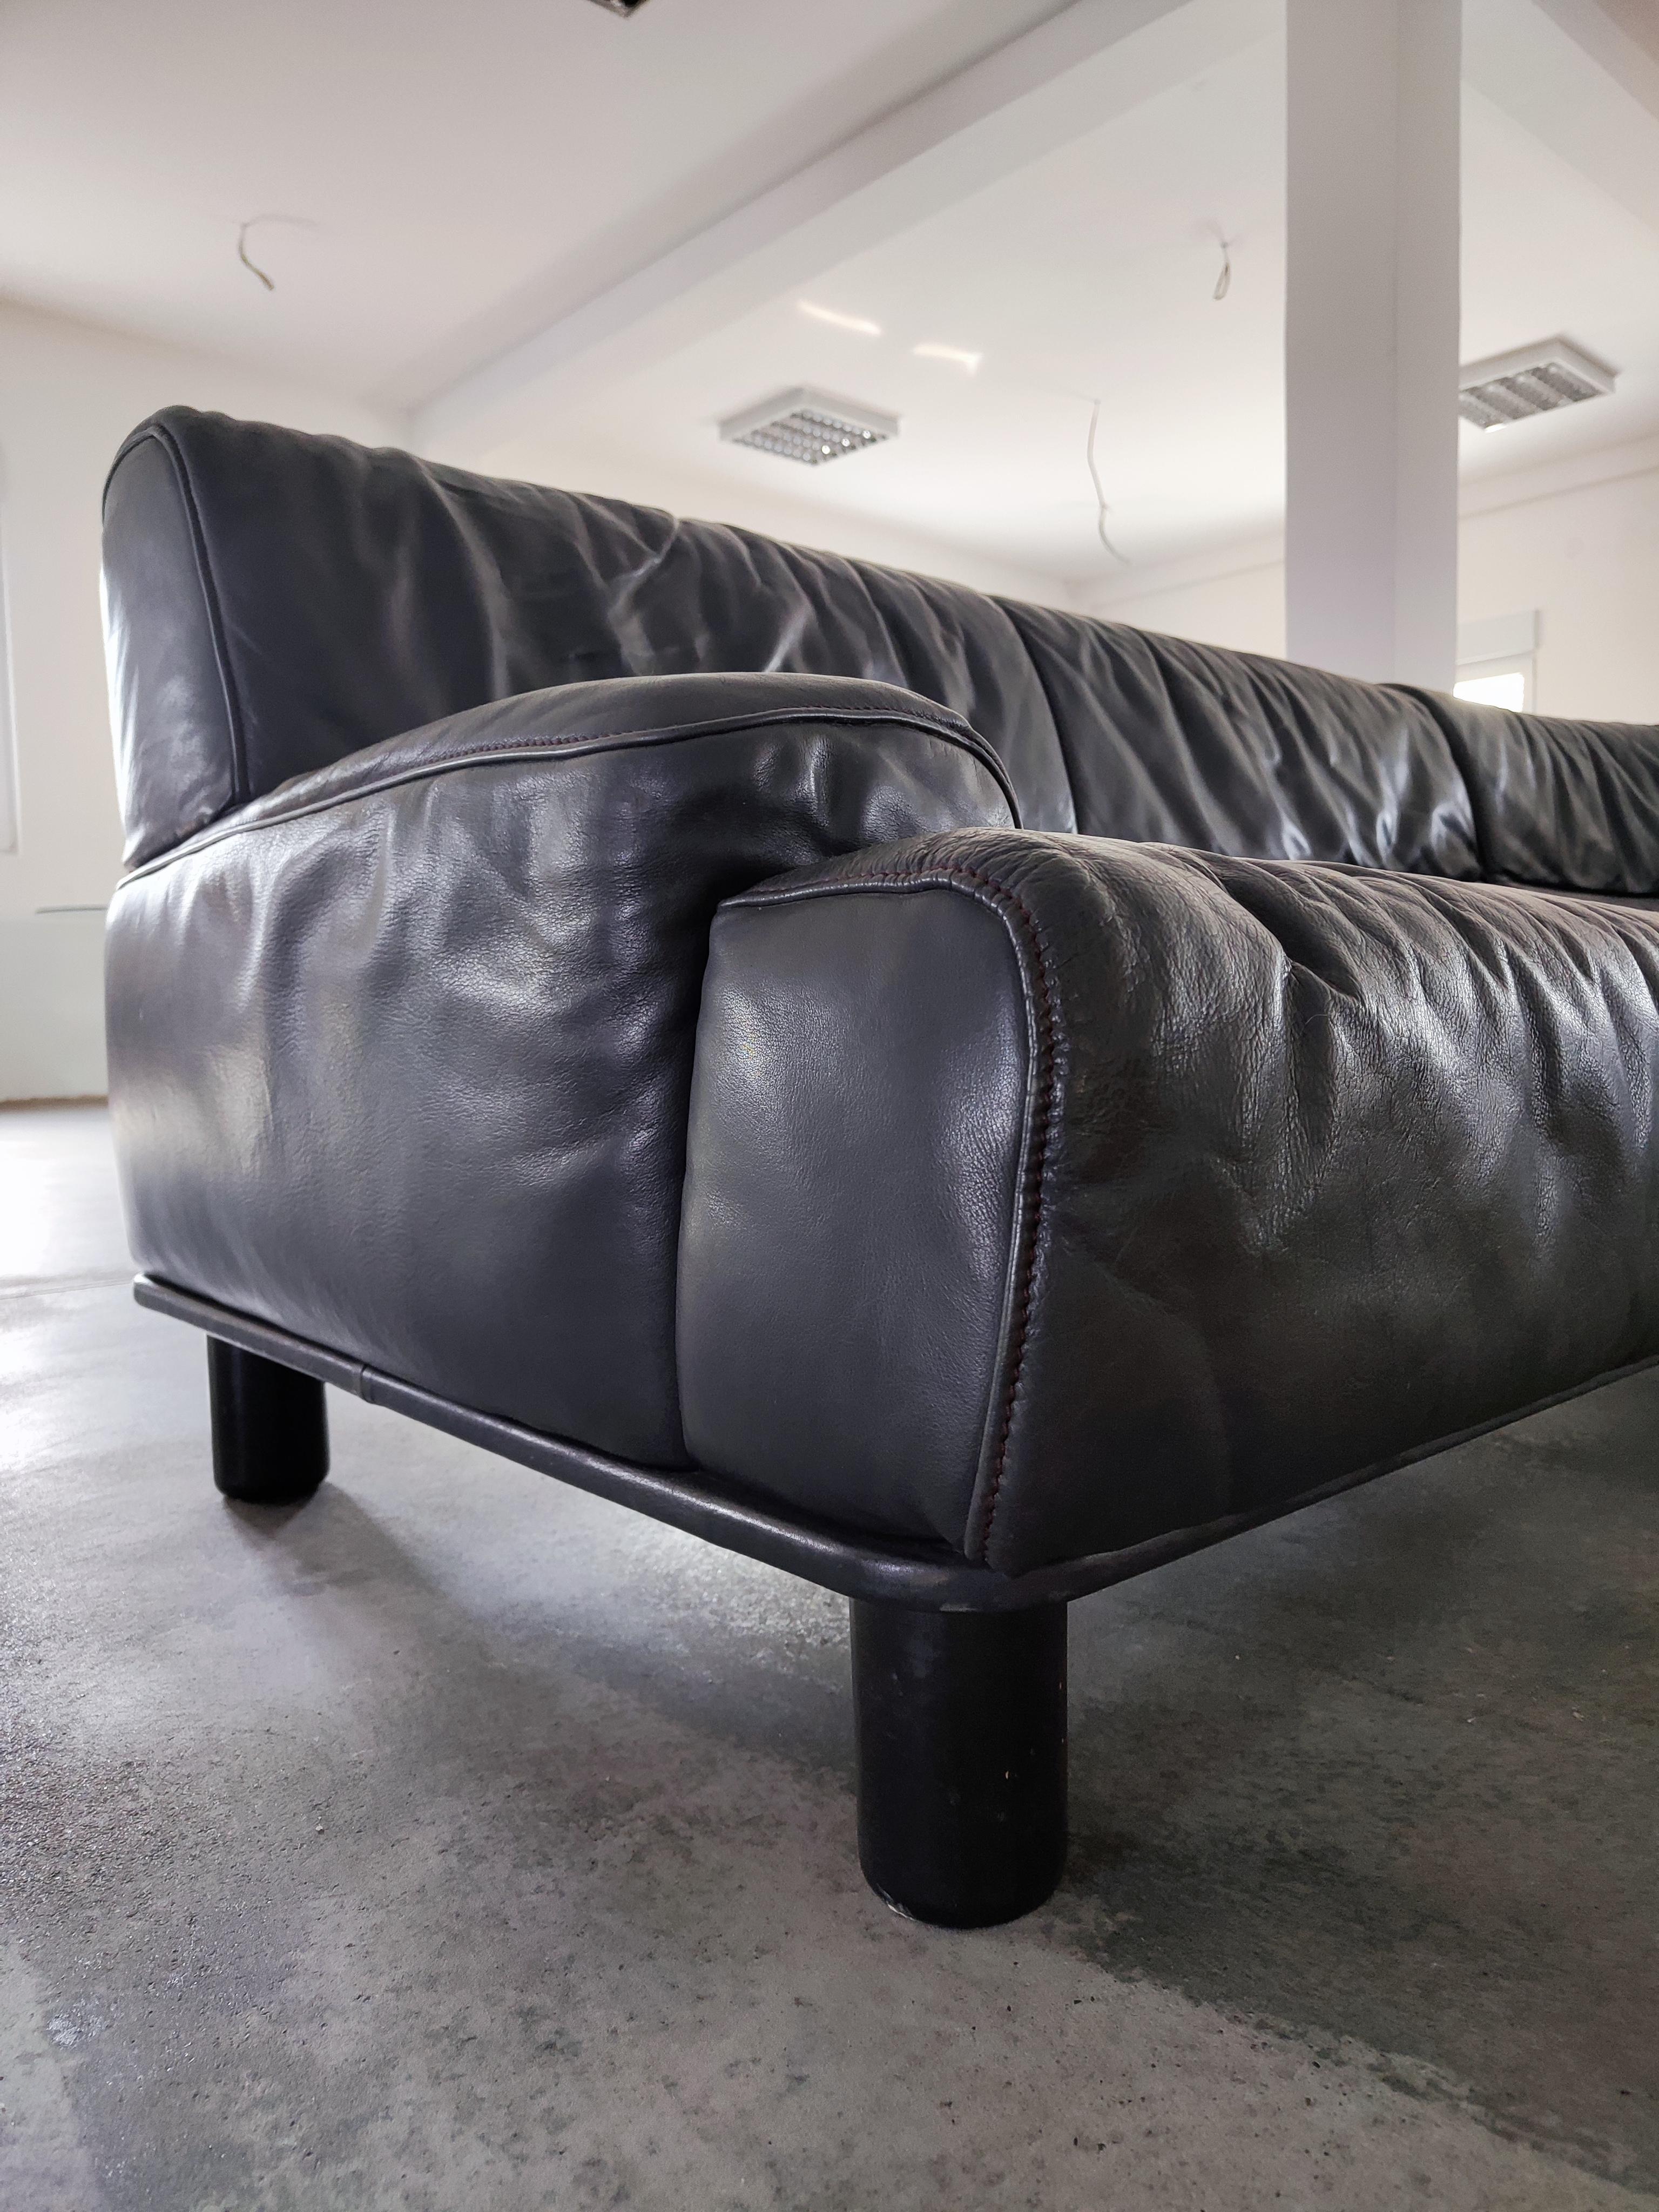 Post-Modern Sectional Anthracite Gray Leather Sofa DS-18 by De Sede, Switzerland 1980s For Sale